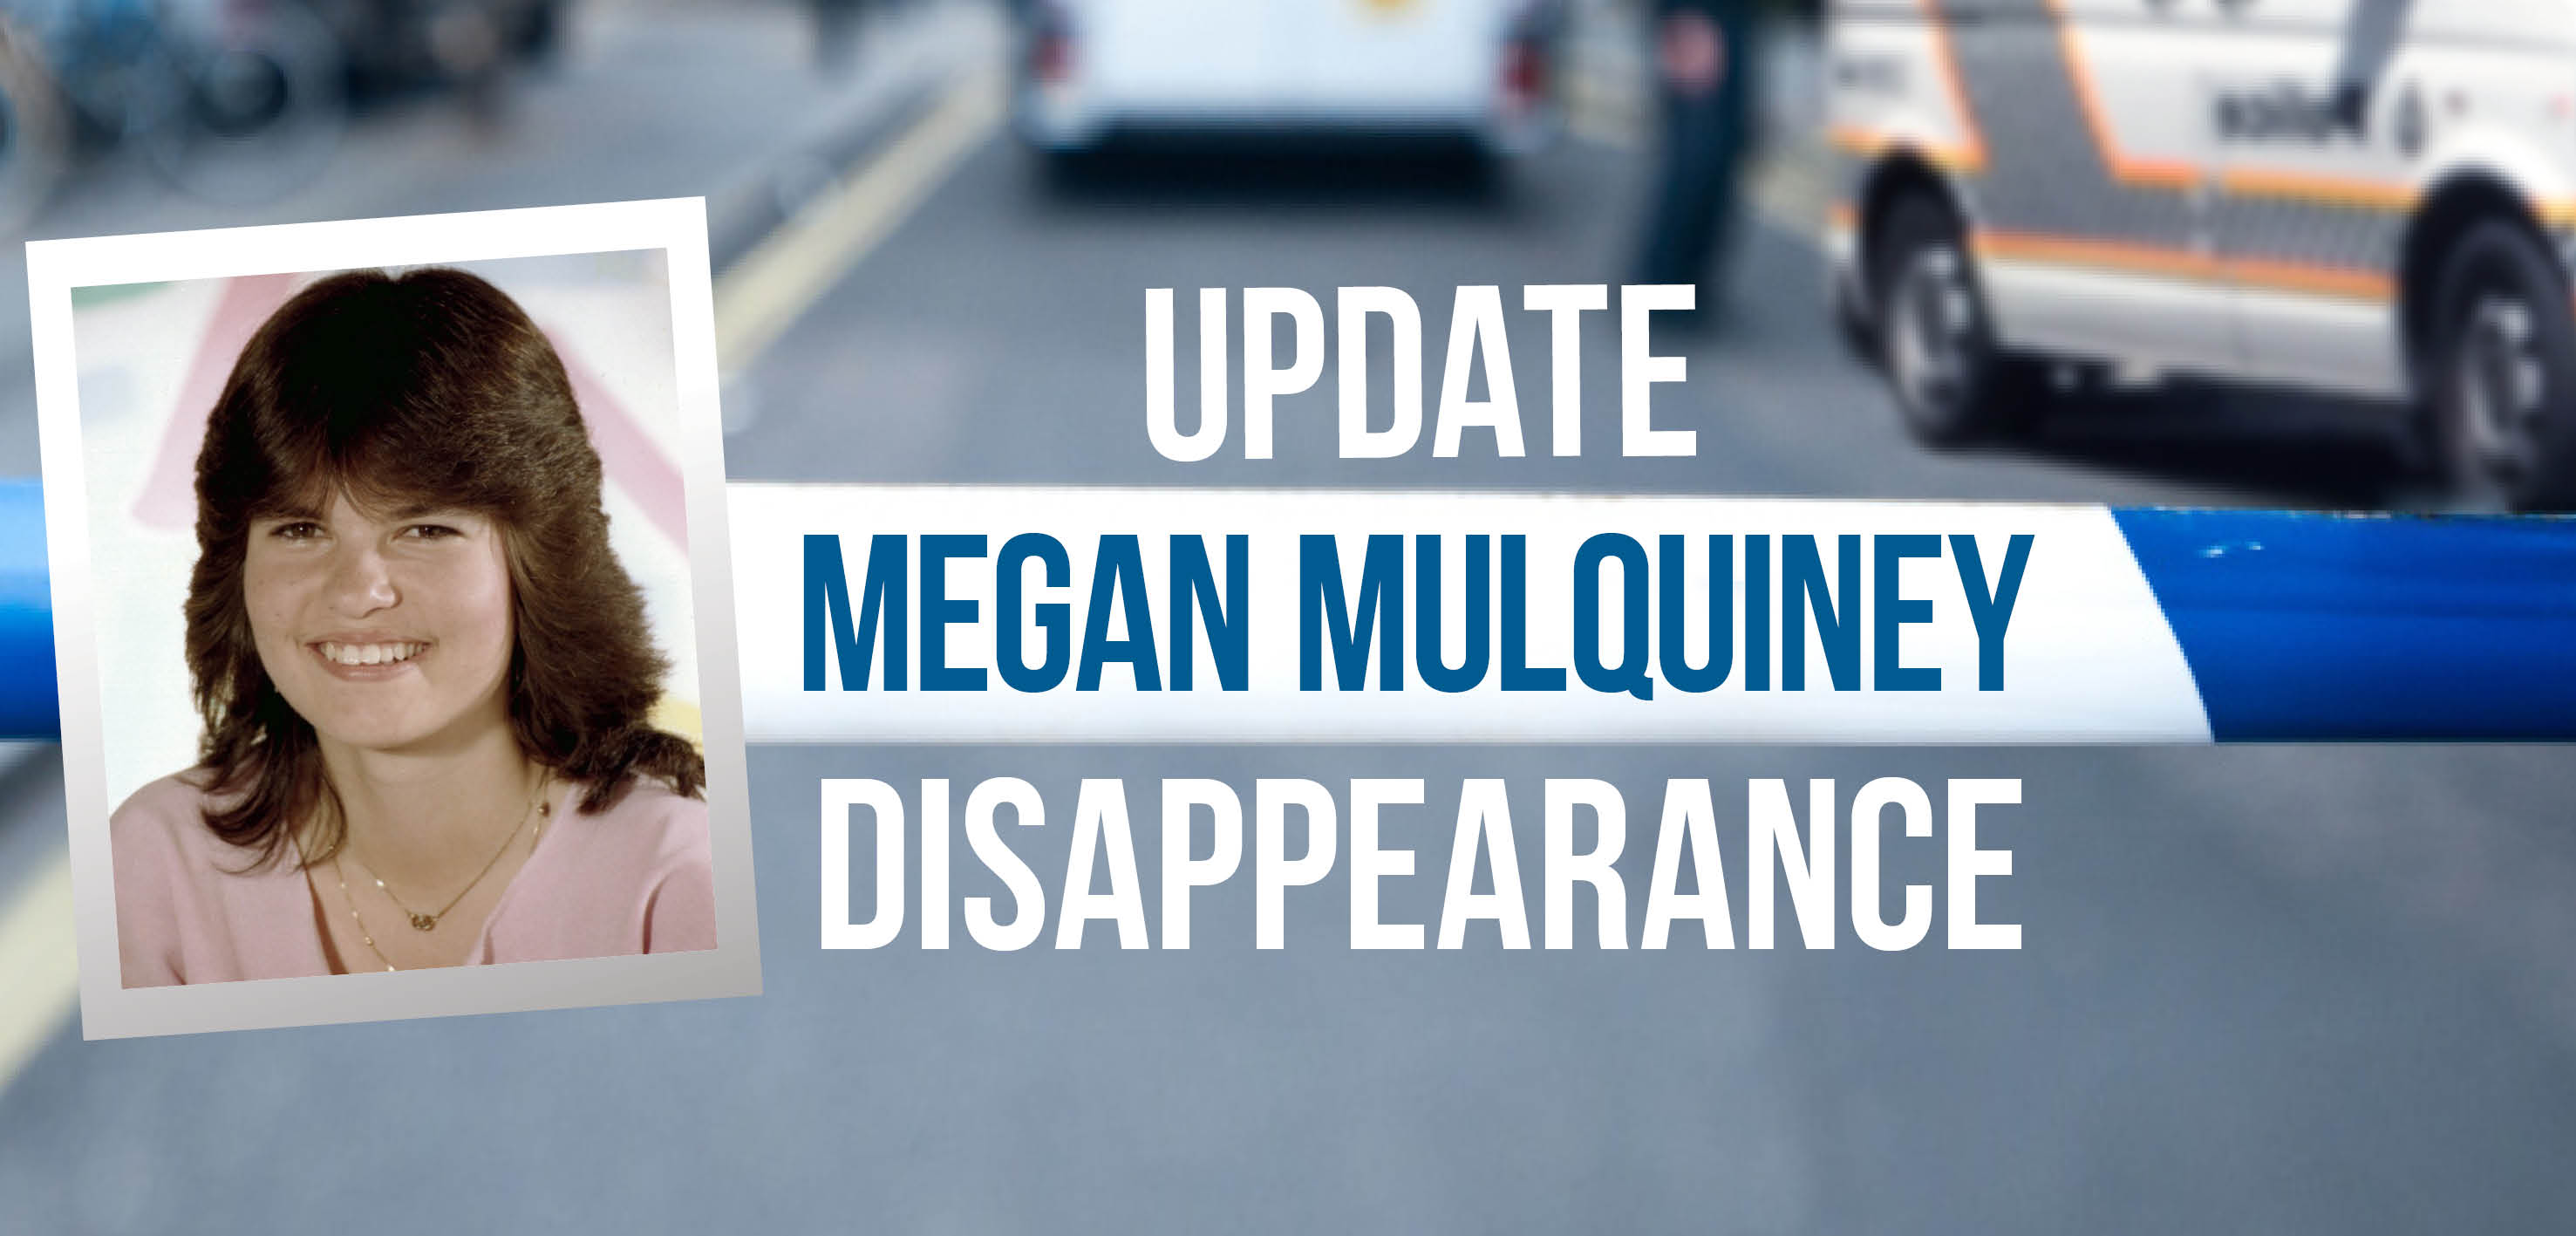 Following new information, ACT Policing has issued a fresh call for information on Canberran Megan Mulquiney ahead the 34th anniversary of her disappearance.